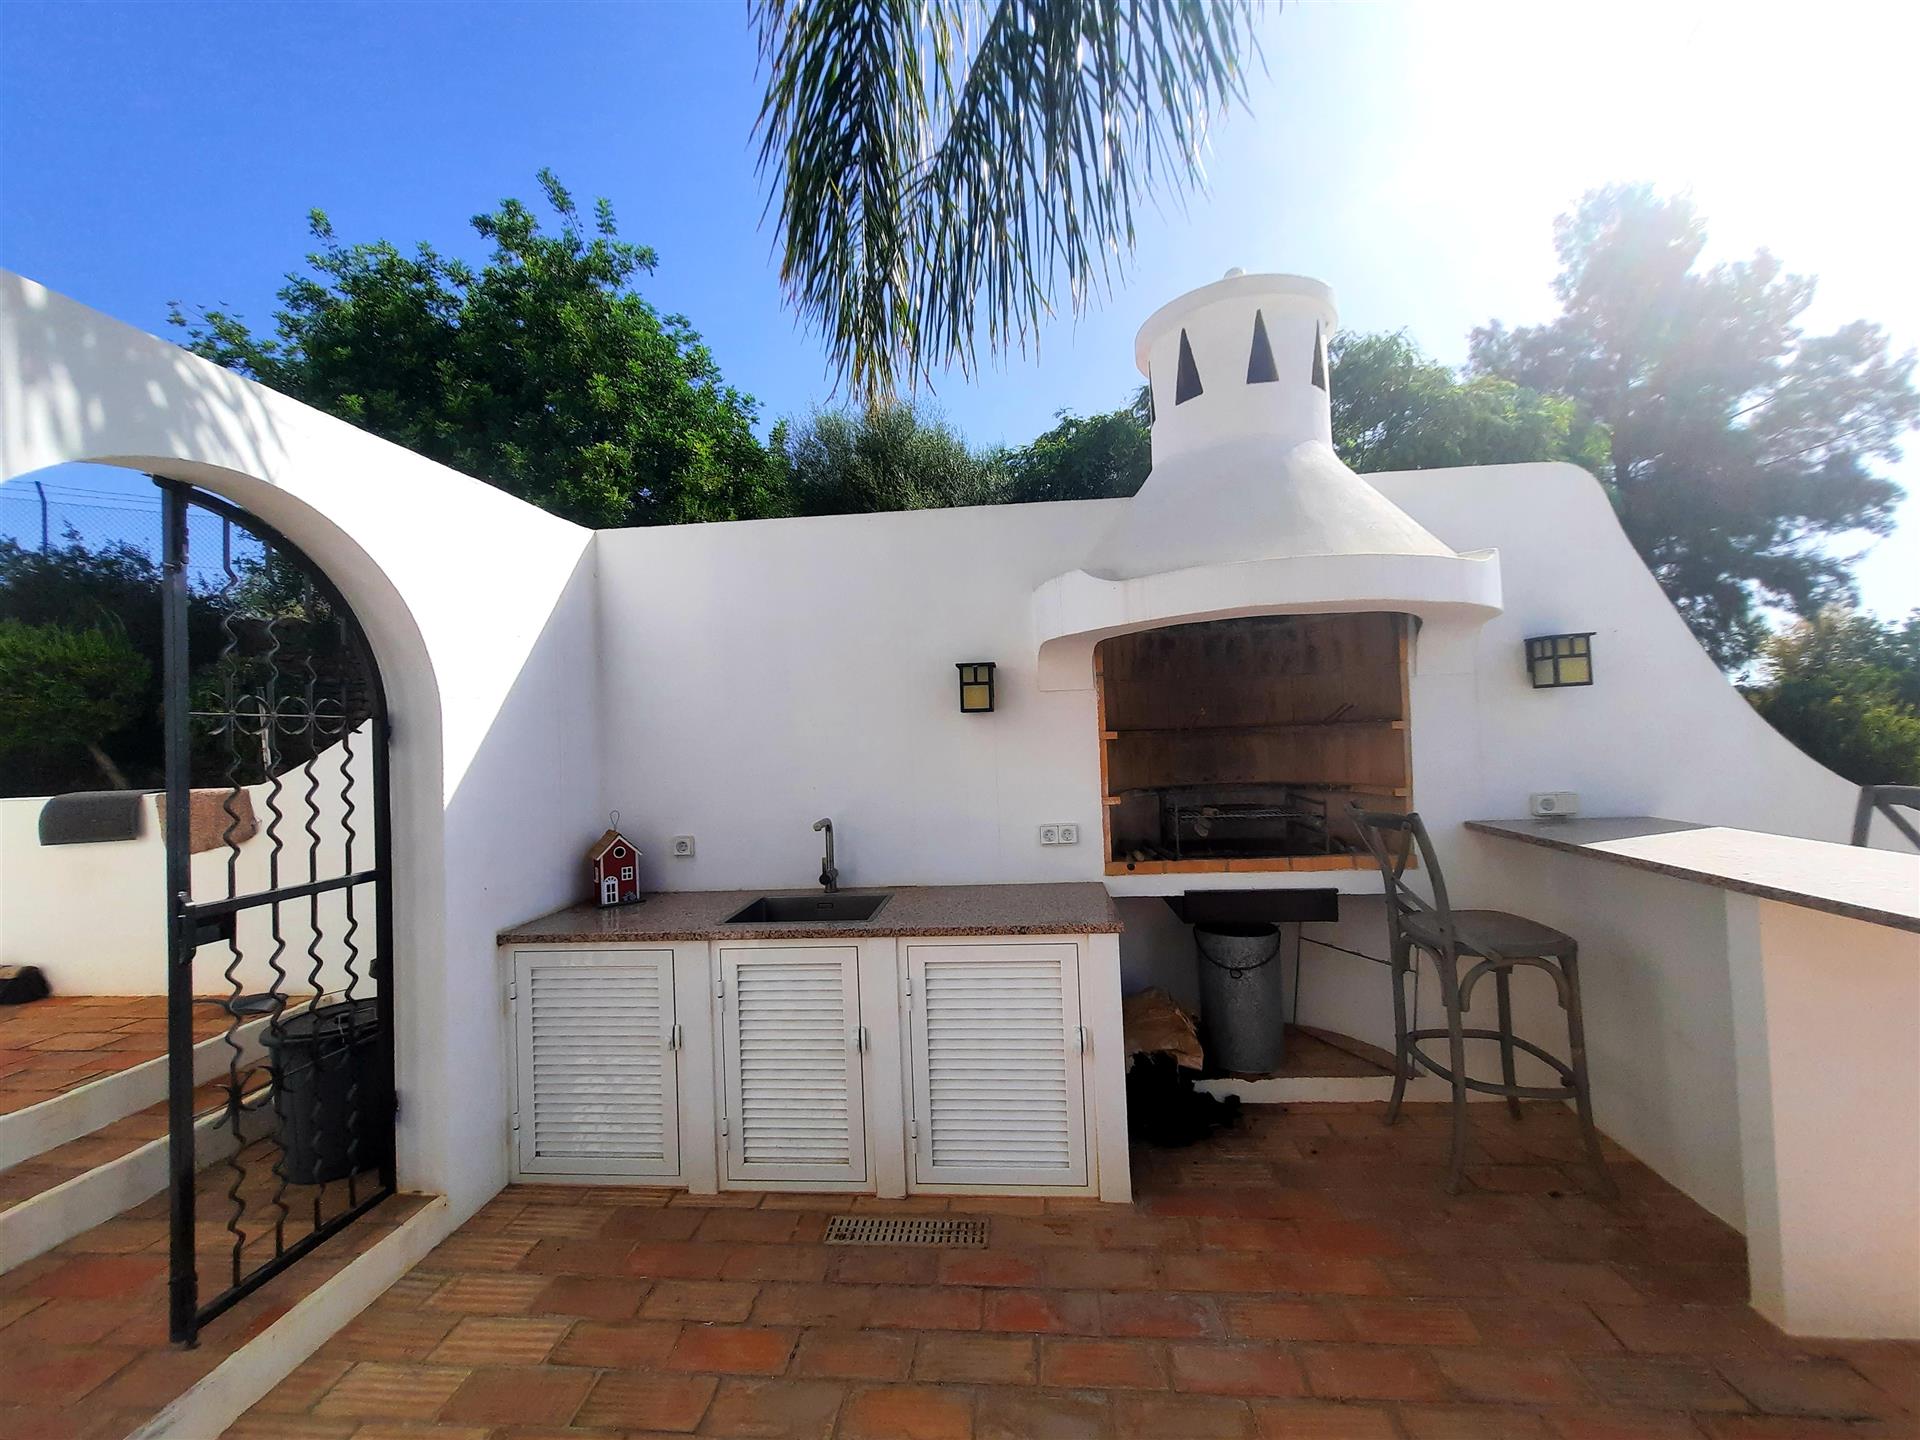 Fabulous Villa with heated pool, gardens, Sea View, garage, and land of 3030 m2